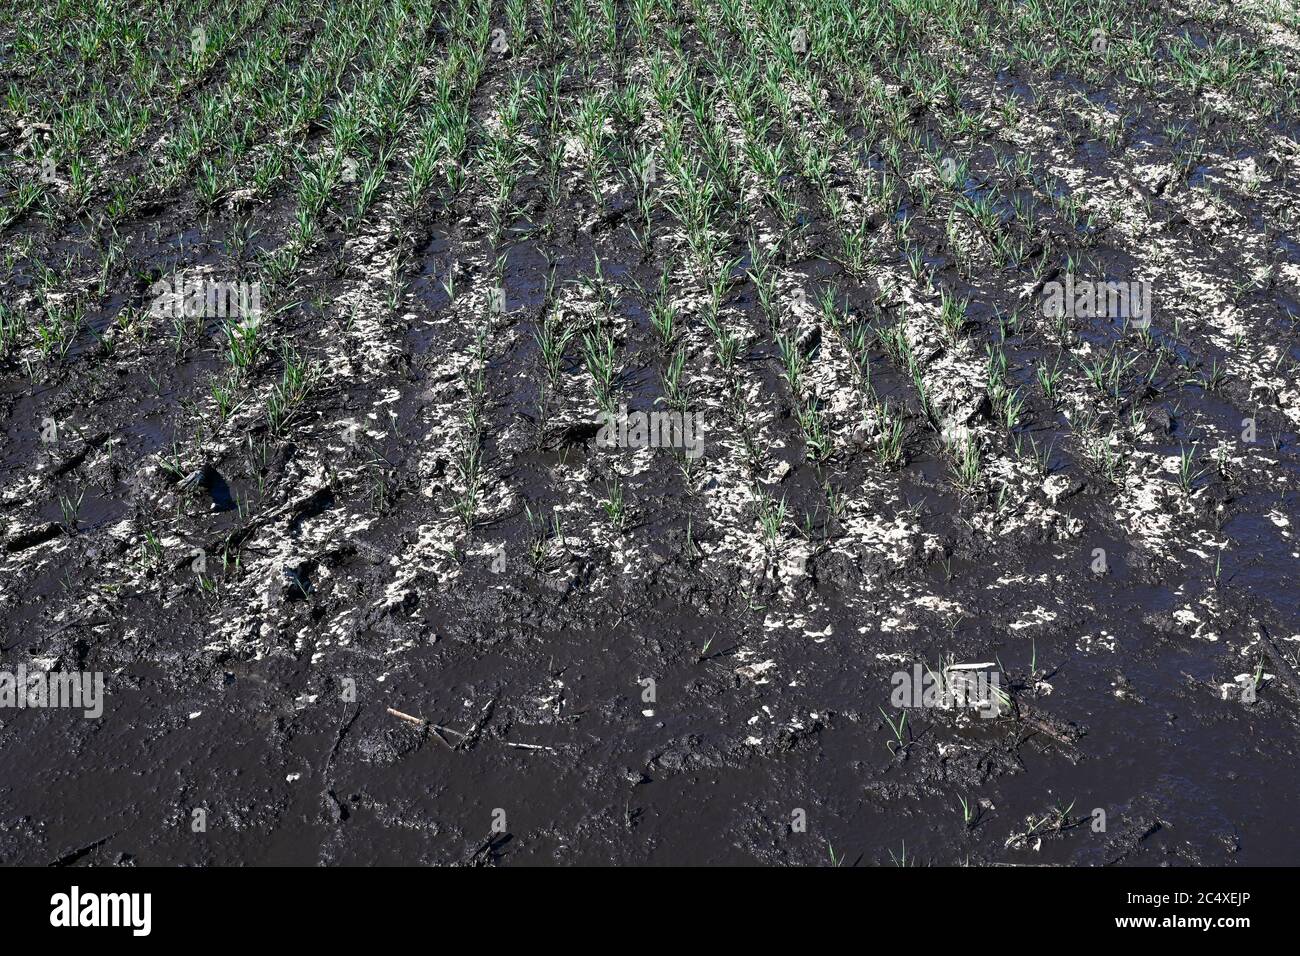 GERMANY, spreading of slurry in grain field, slurry from cattle stables increase nitrate content in groundwater, soil and grain plant Stock Photo